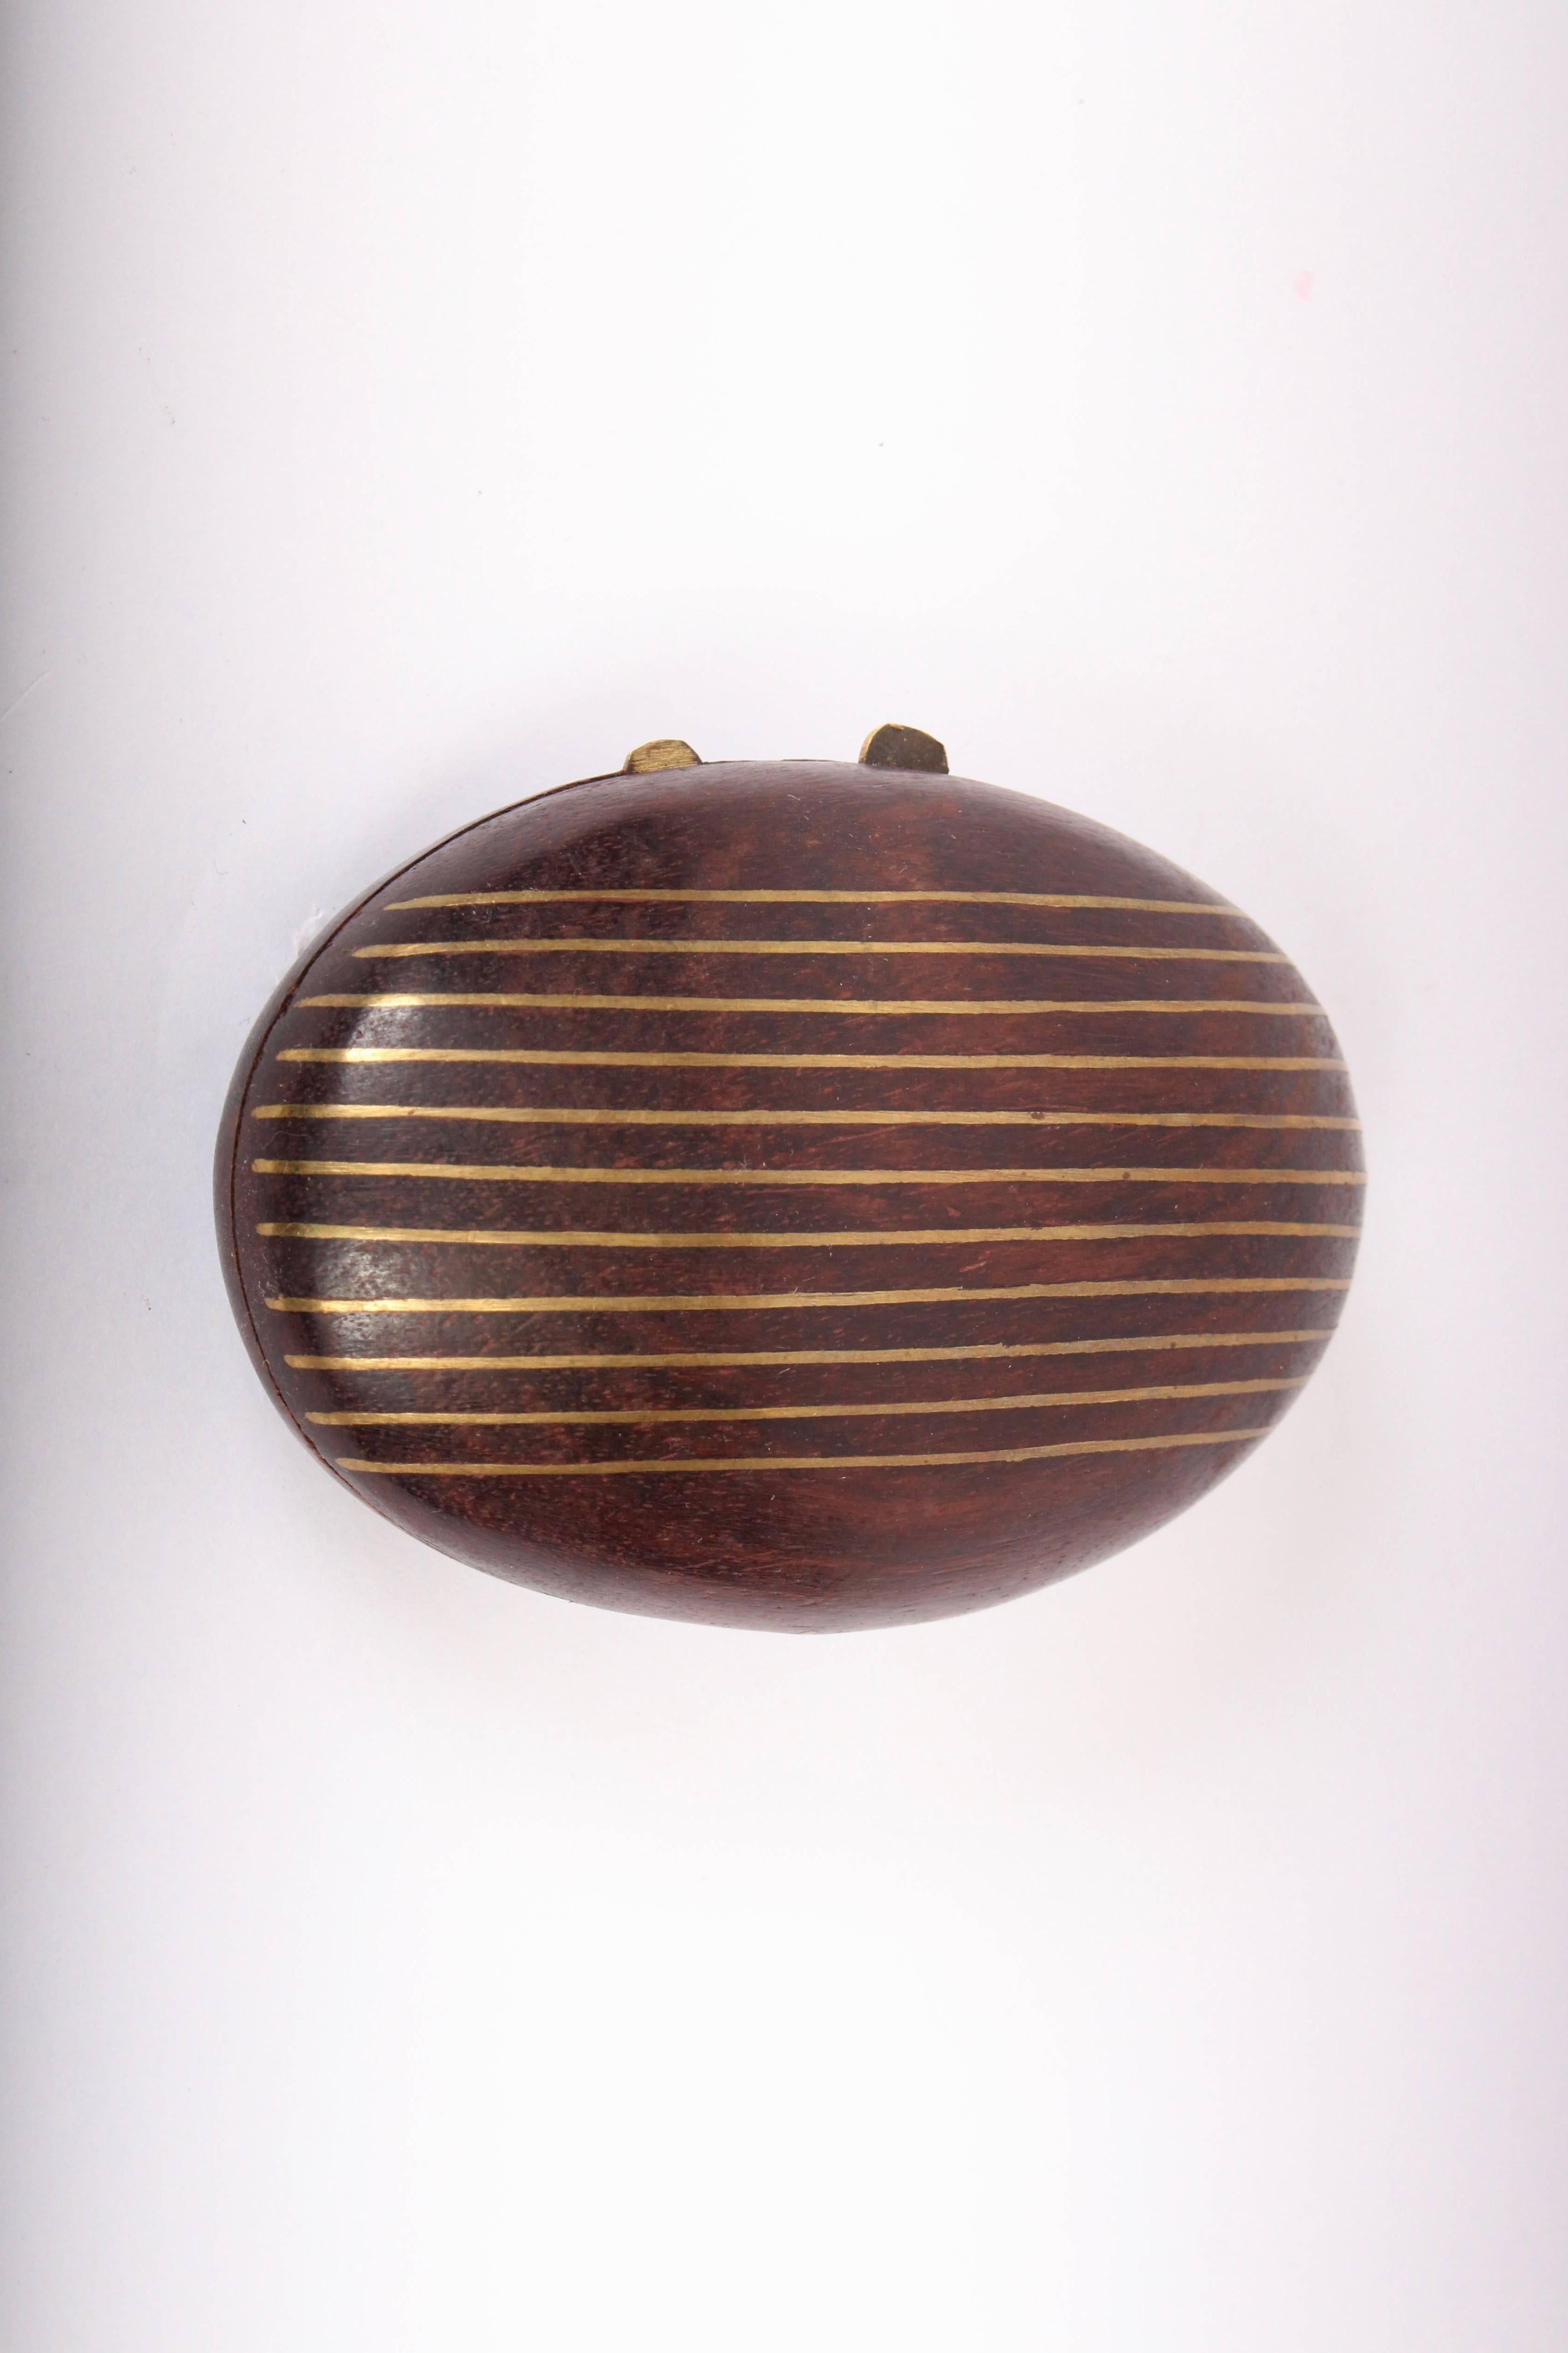 American mid century rosewood and brass inlay small oval accessory box in the style of Paul Evans and Phillip Lloyd, circa 1960. Featuring a handcrafted clam shaped 2-piece smooth dark grain rosewood box, banded with horizontal brass inlay. Detailed